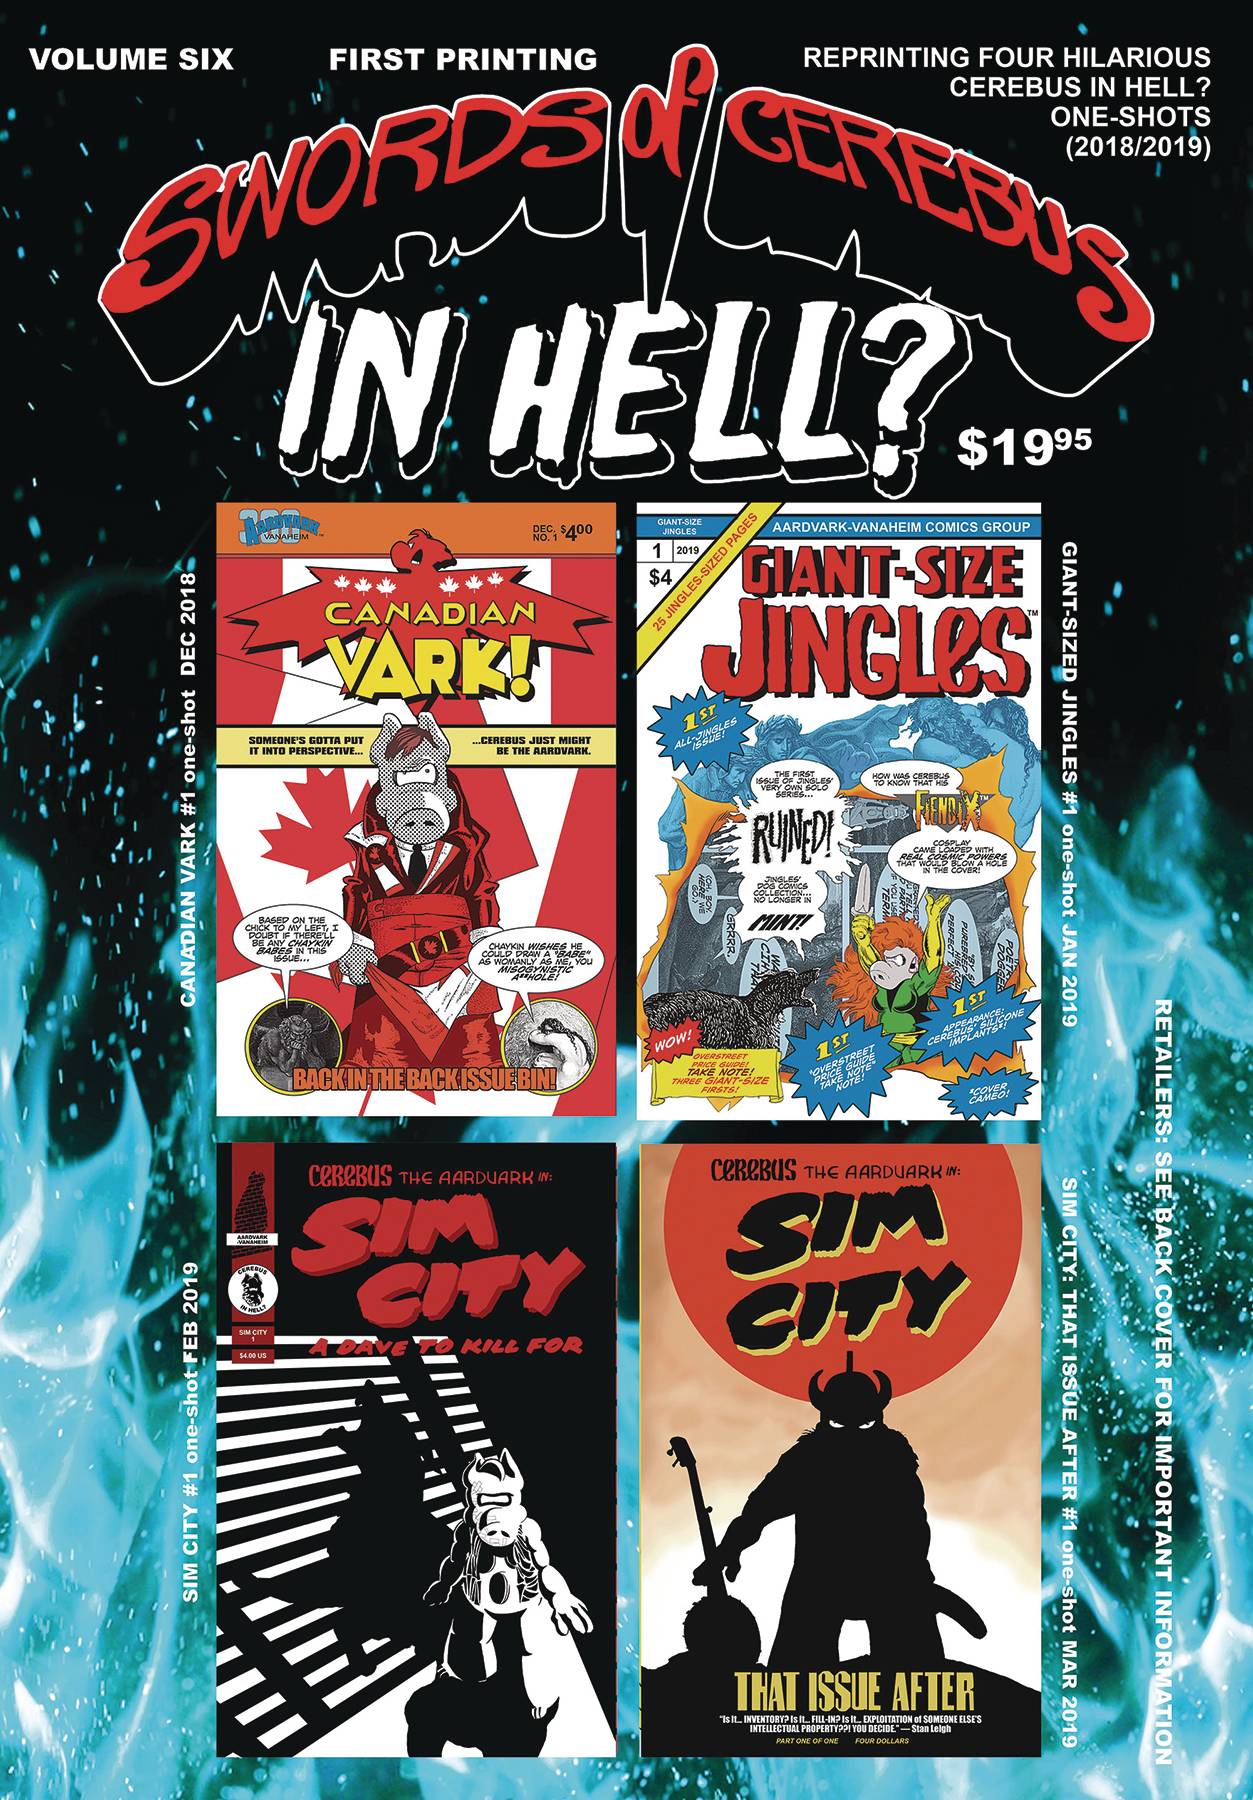 SWORDS OF CEREBUS IN HELL TP VOL 06